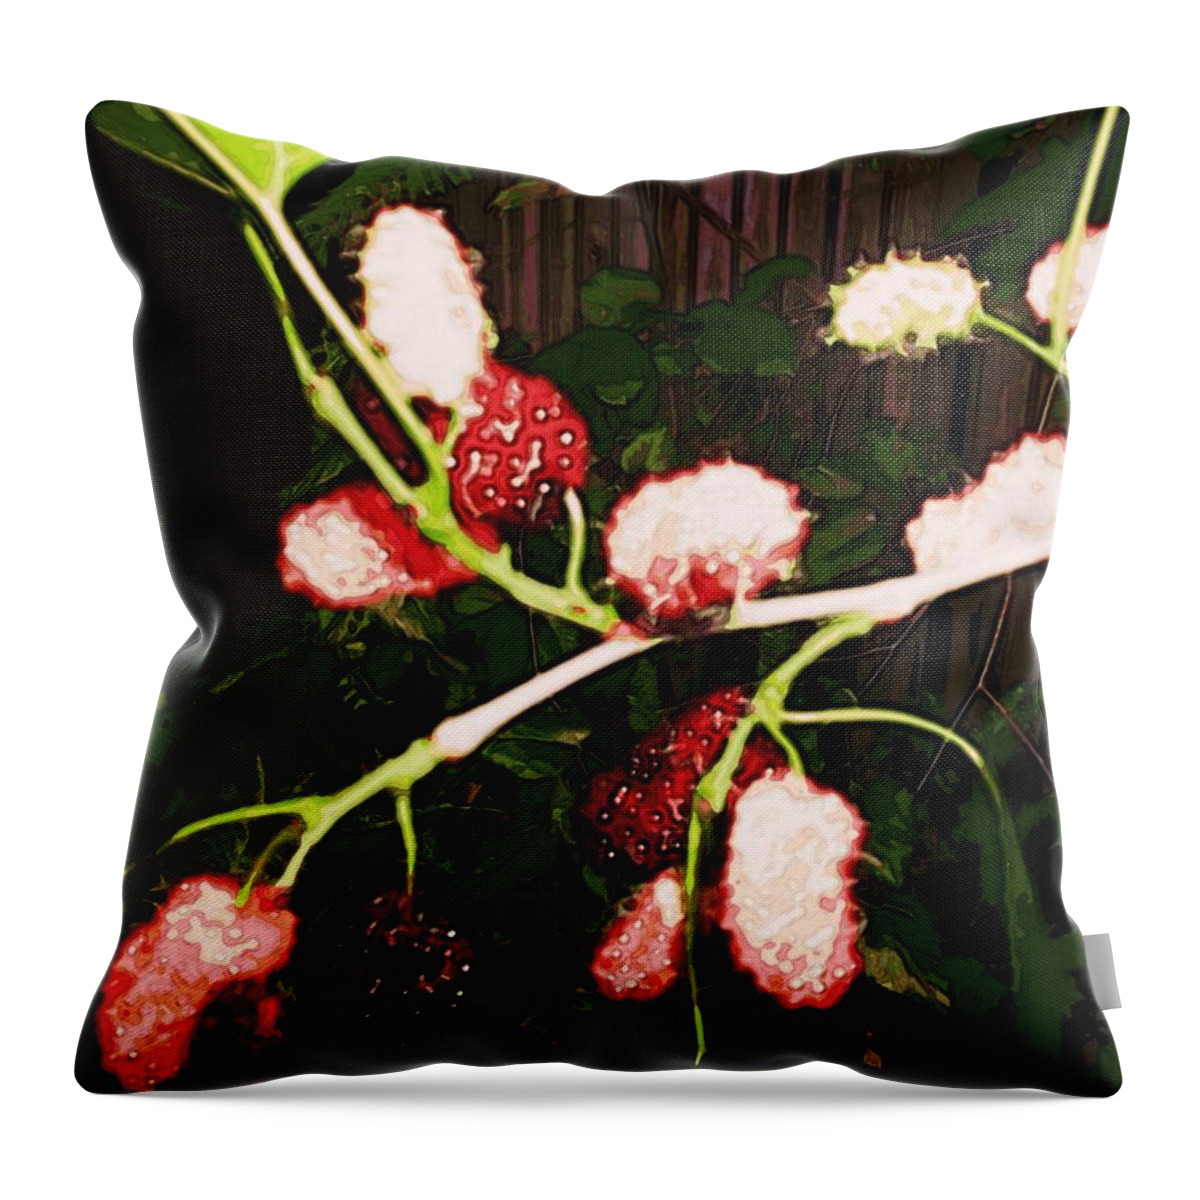 Garden Throw Pillow featuring the digital art The New Mulberries by Winsome Gunning